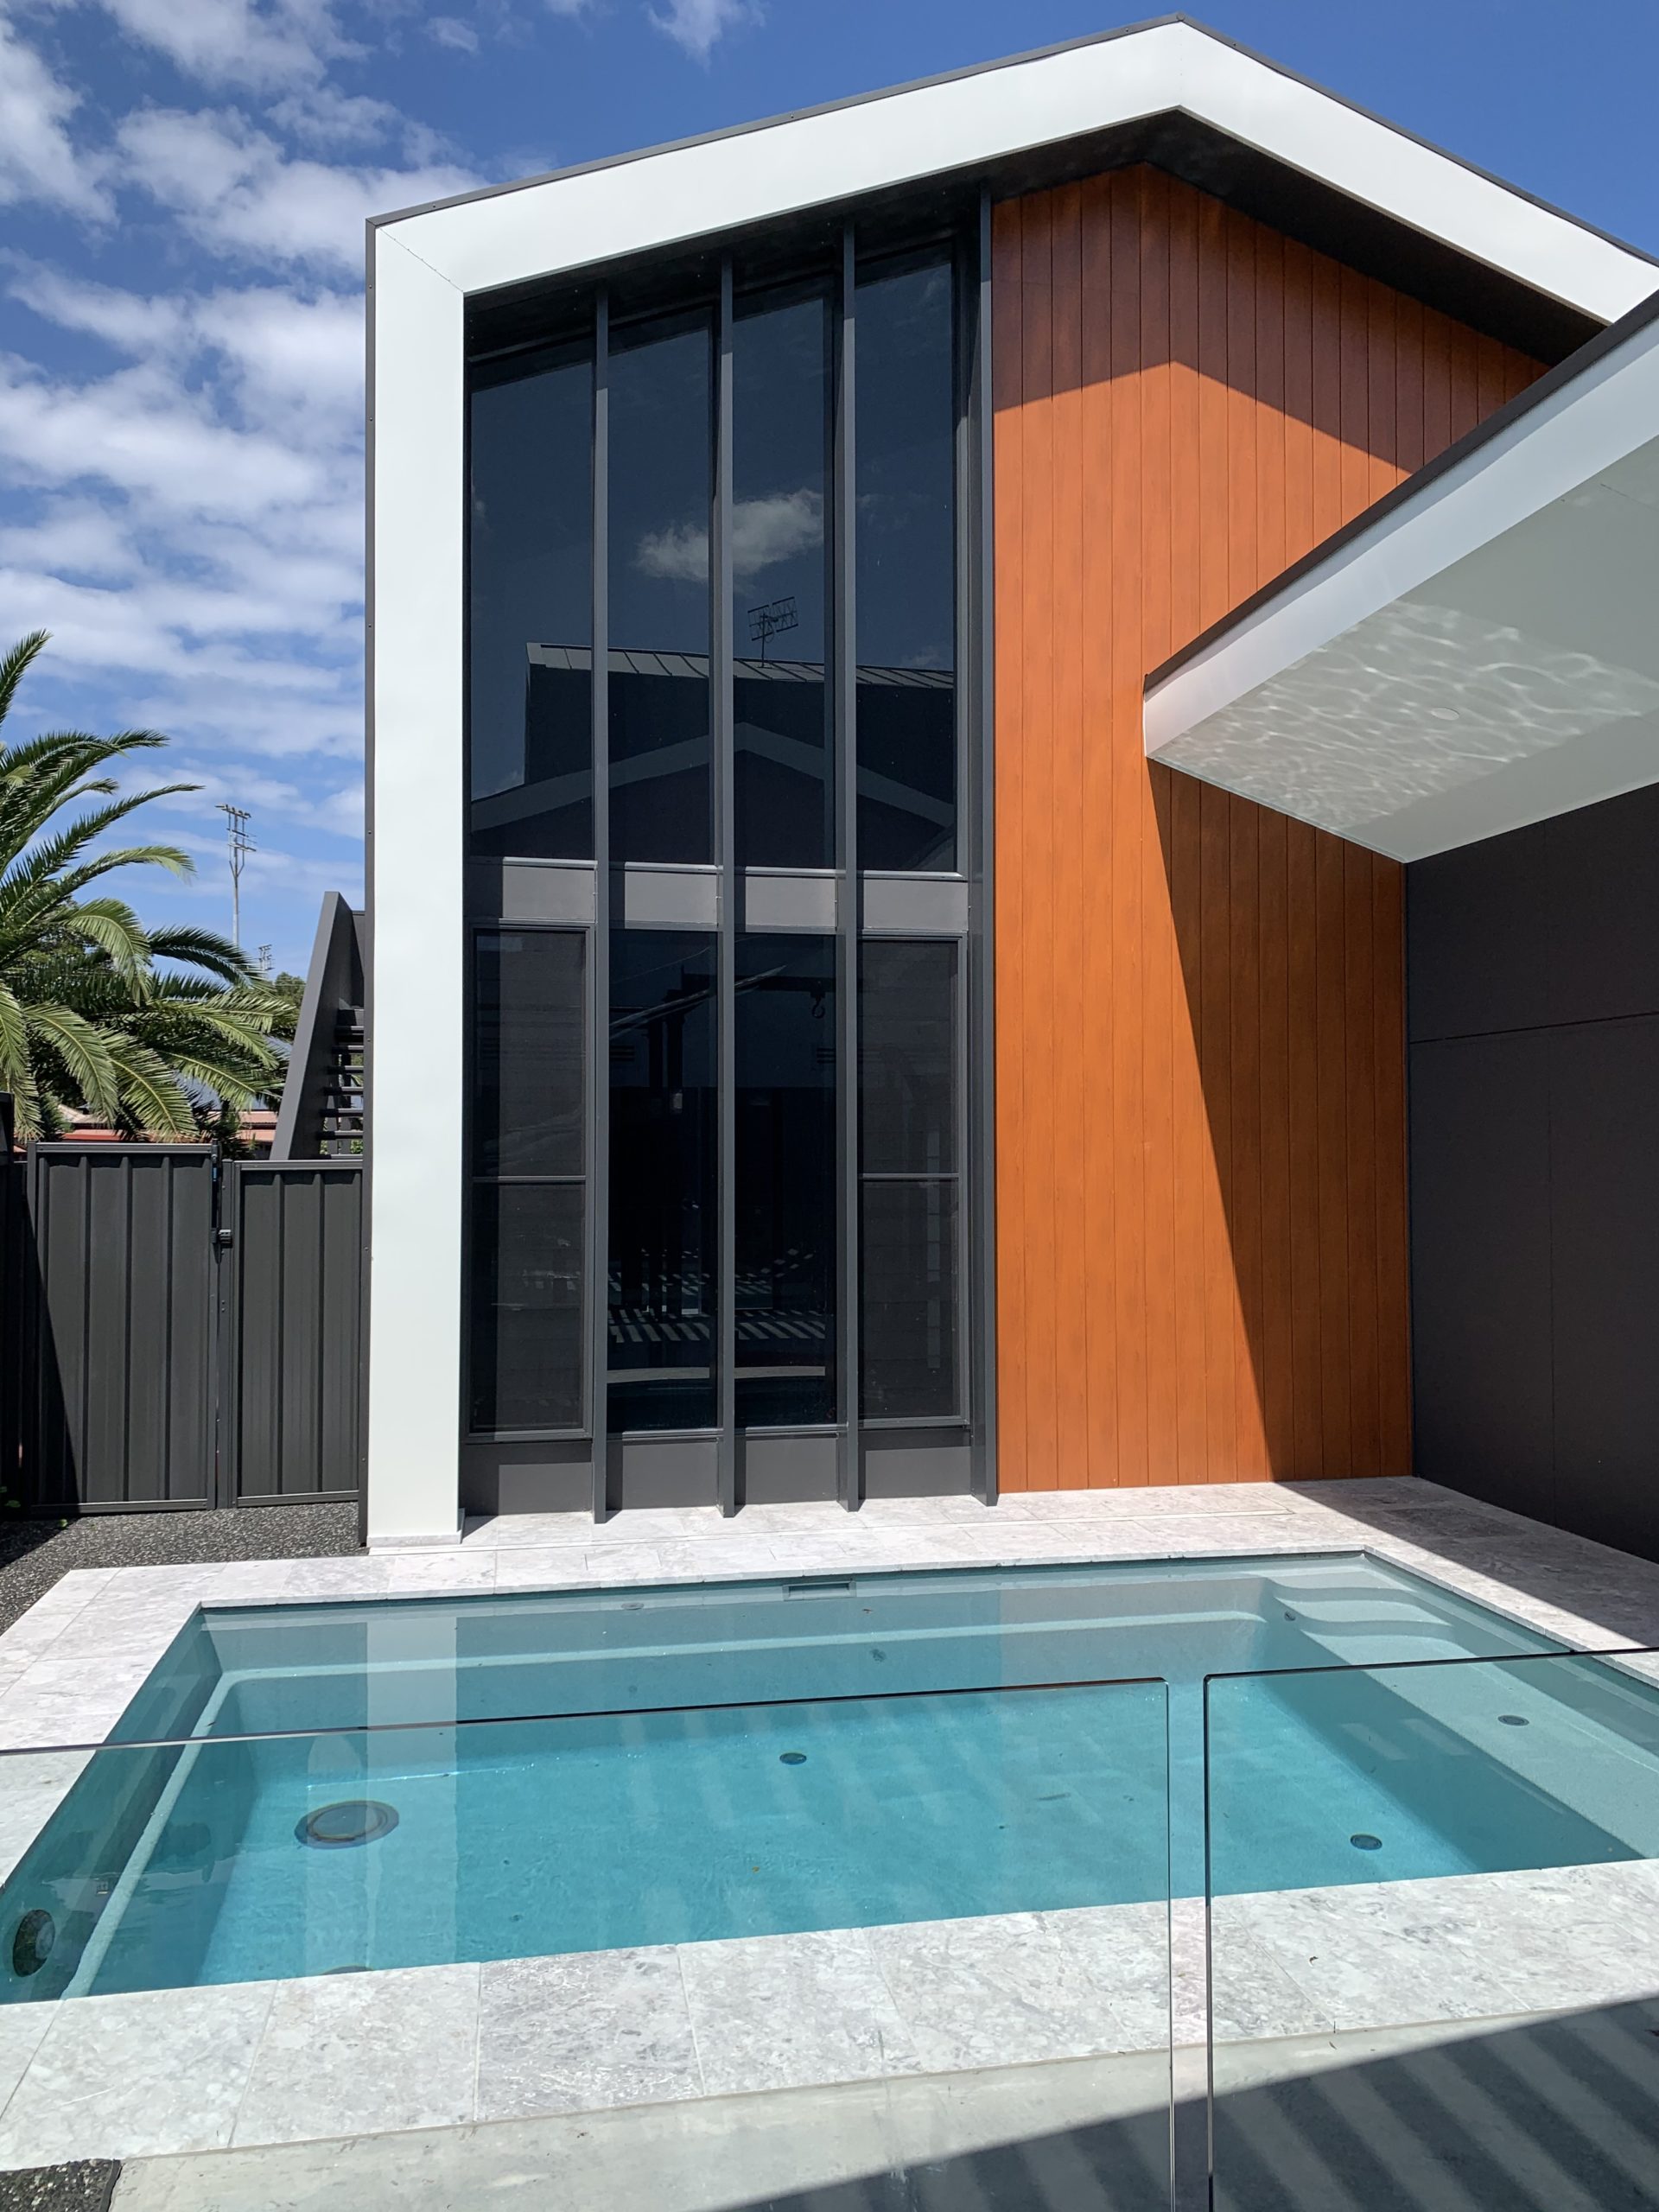 Featured image for “Laneway House Morgan Street Merewether”